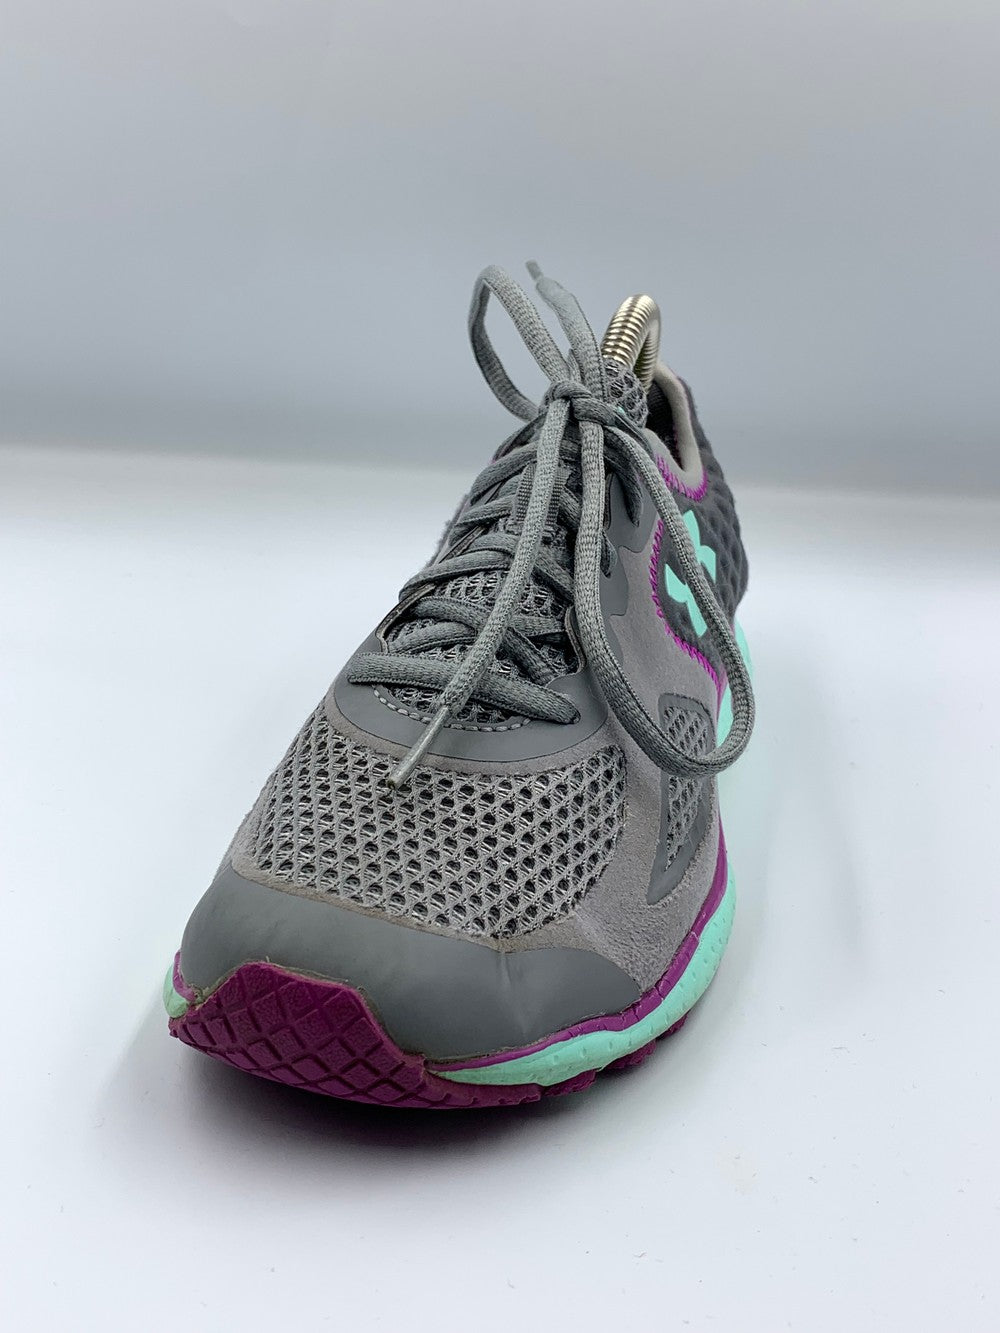 Under Armour Micrg Original Brand Sports Gray Running For Women Shoes